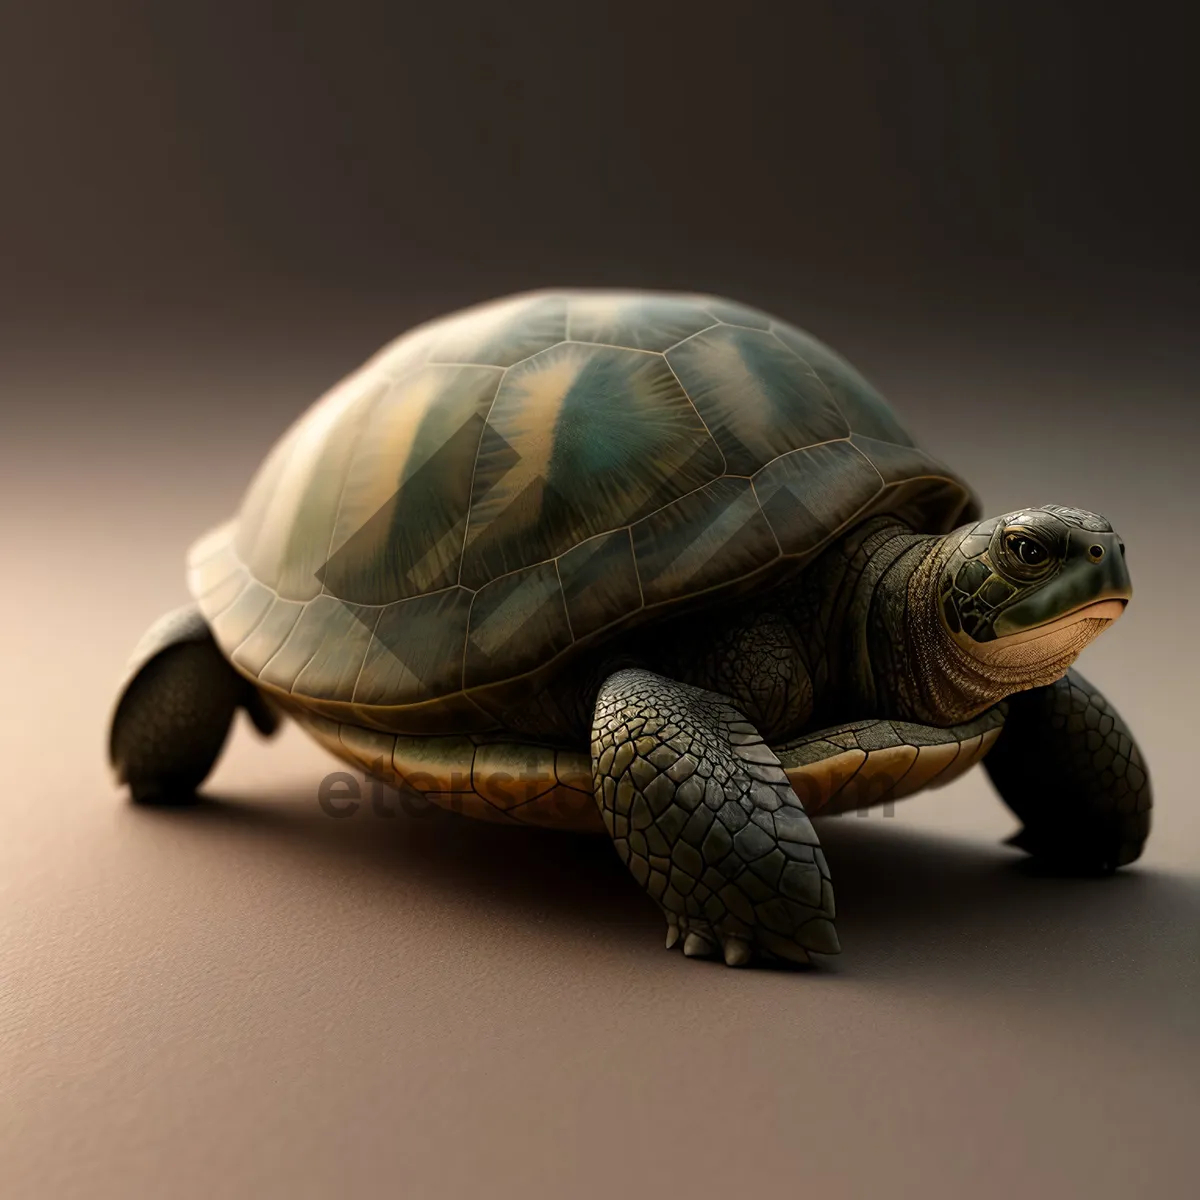 Picture of Adorable Aquatic Terrapin: Slow-moving Reptile with Shell